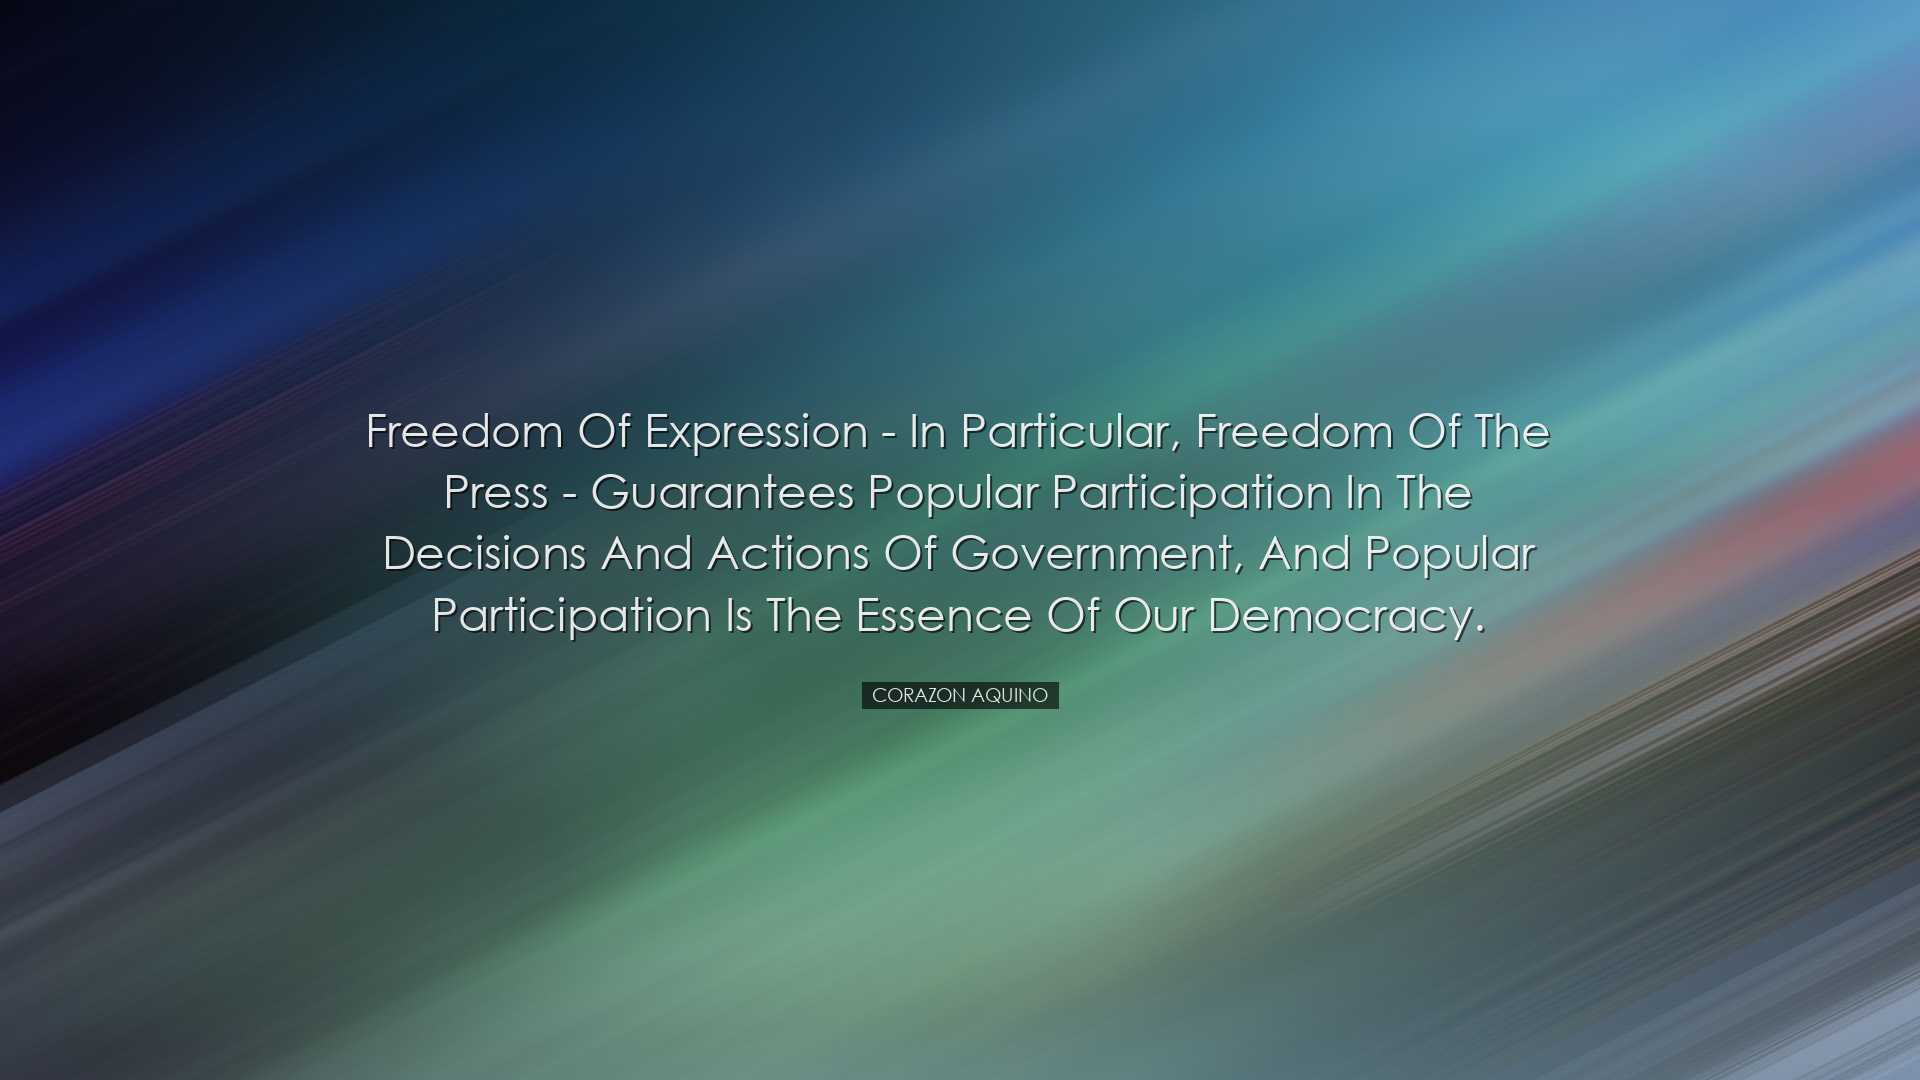 Freedom of expression - in particular, freedom of the press - guar